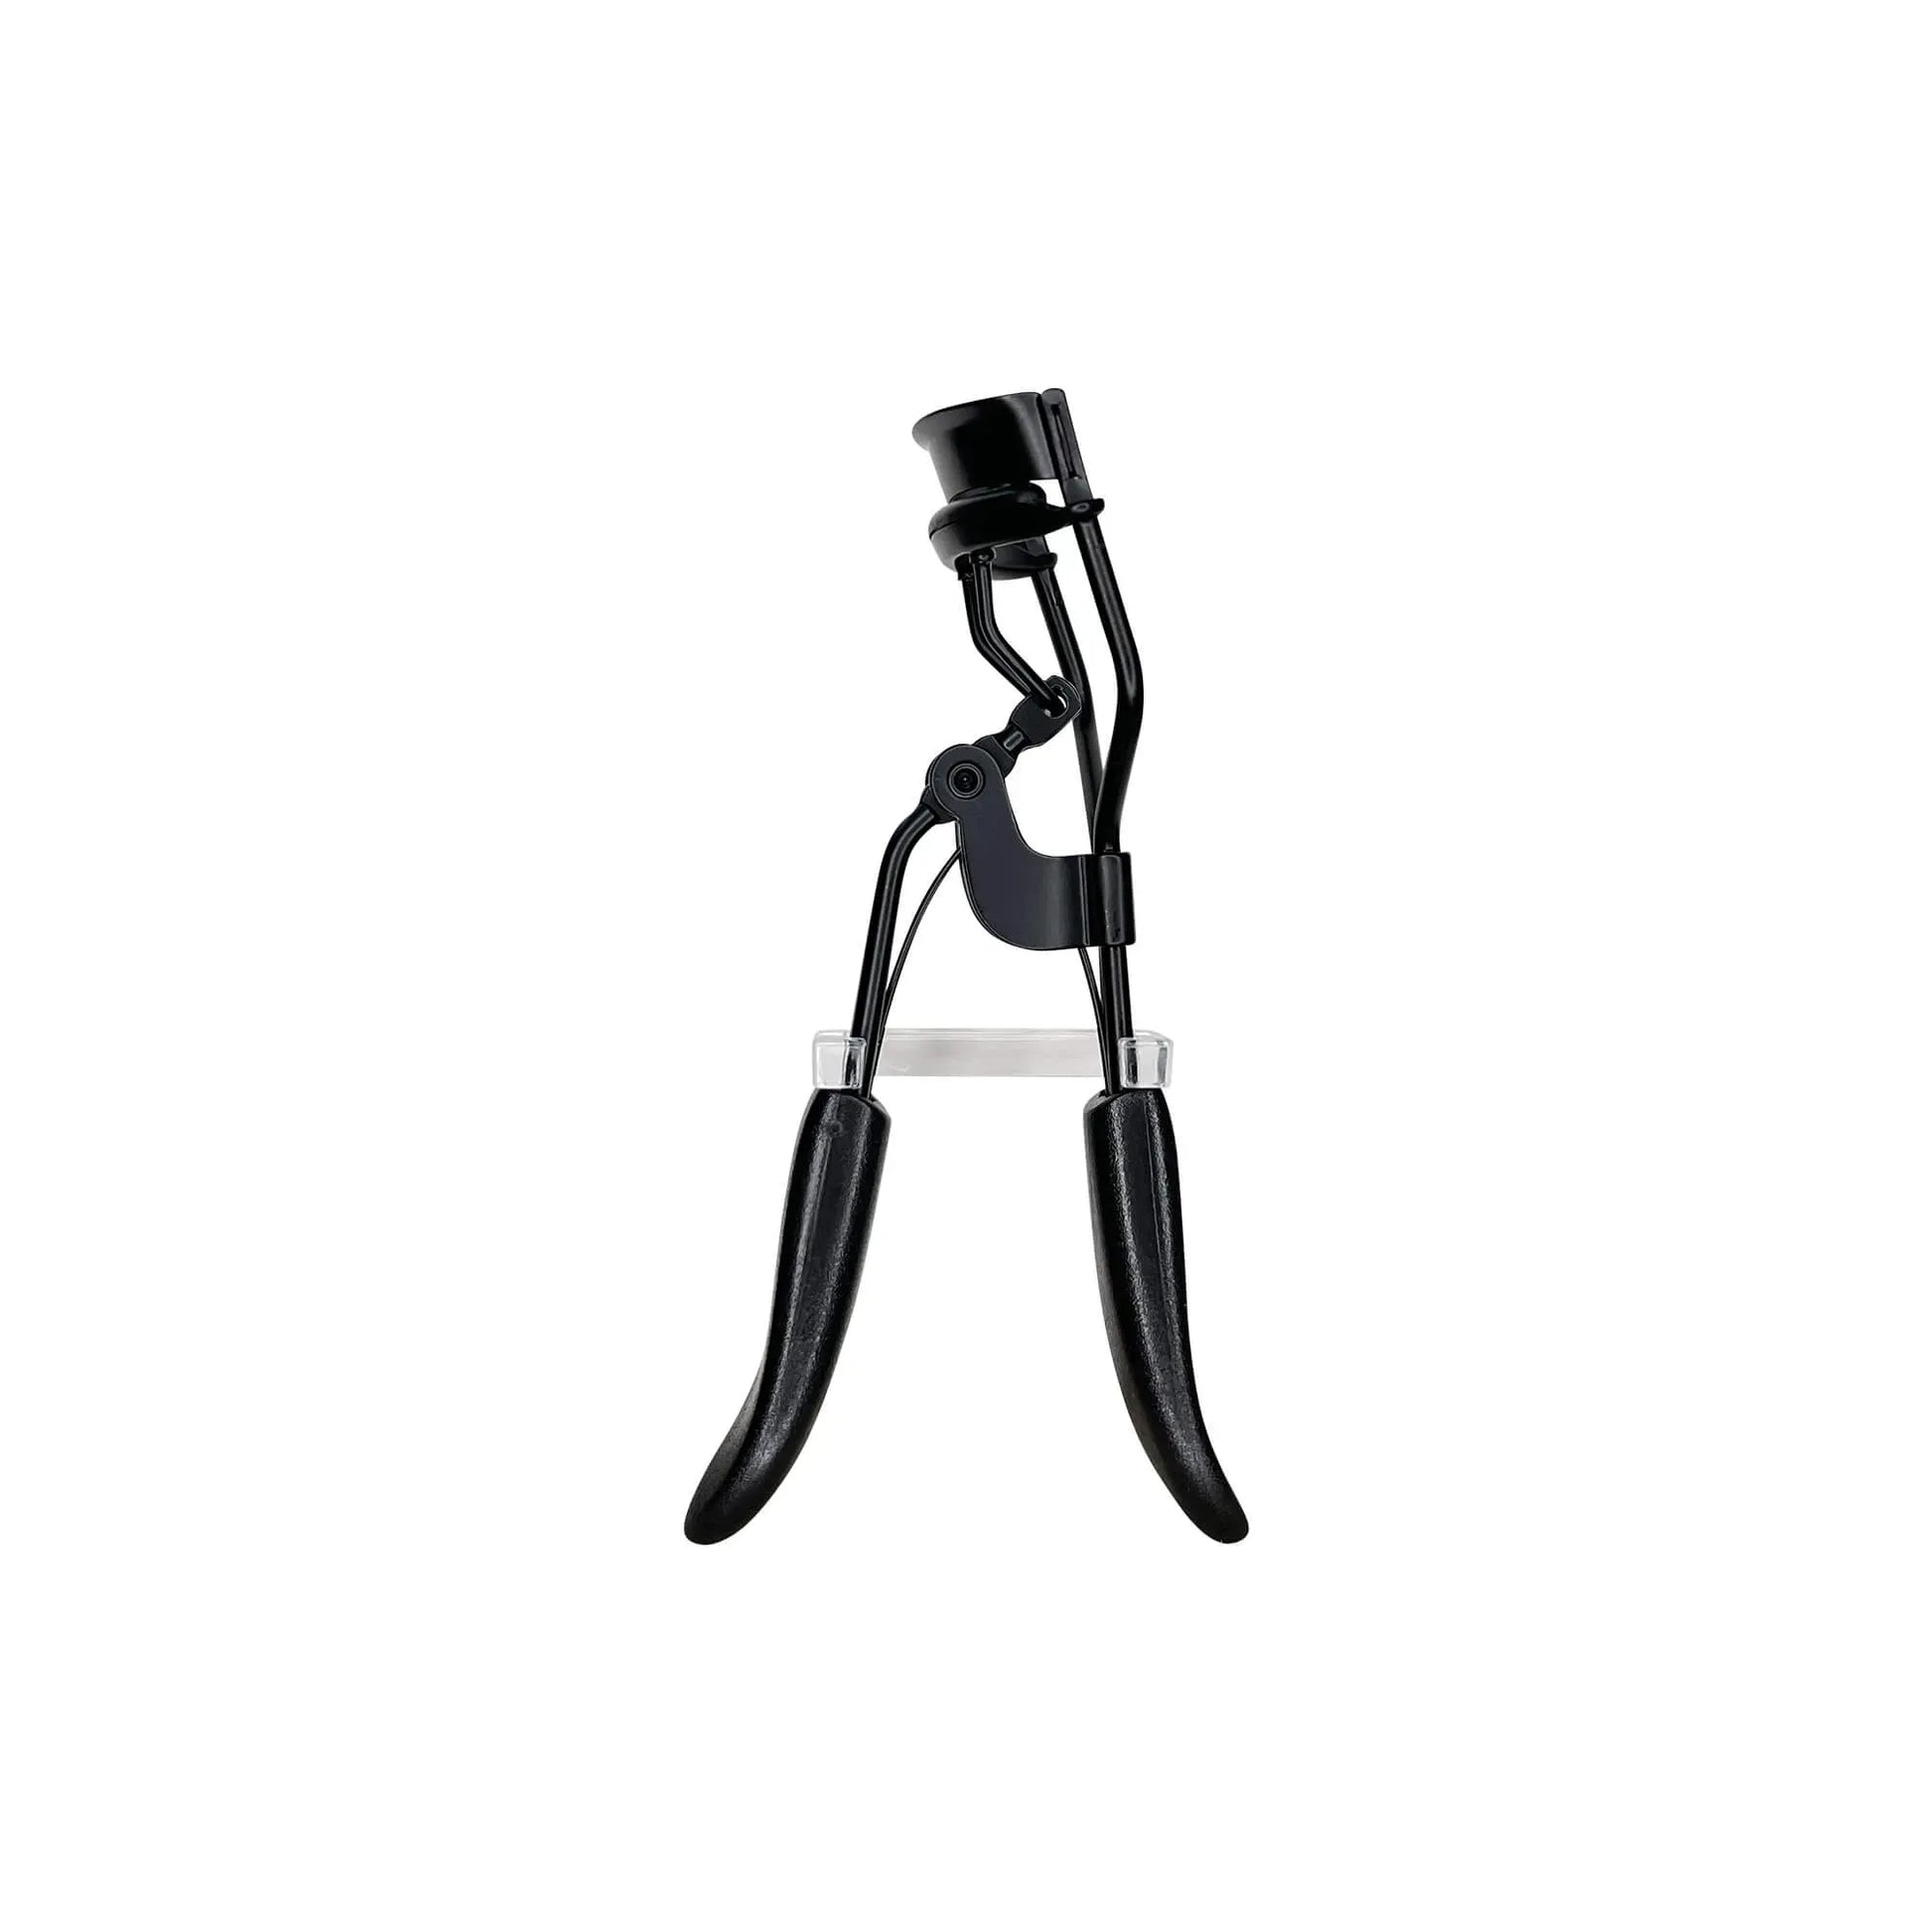 Get the bombshell lashes you deserve with our Cruisin Organics padded eyelash curler, featuring padded handles. The curler has padded handles and a silicone pad to apply the perfect amount of pressure for that long-lasting lash curl. The curved and wide mouth will suit all eye shapes! Pair this curler with your favorite mascara to get the dramatic flair you’re looking for.